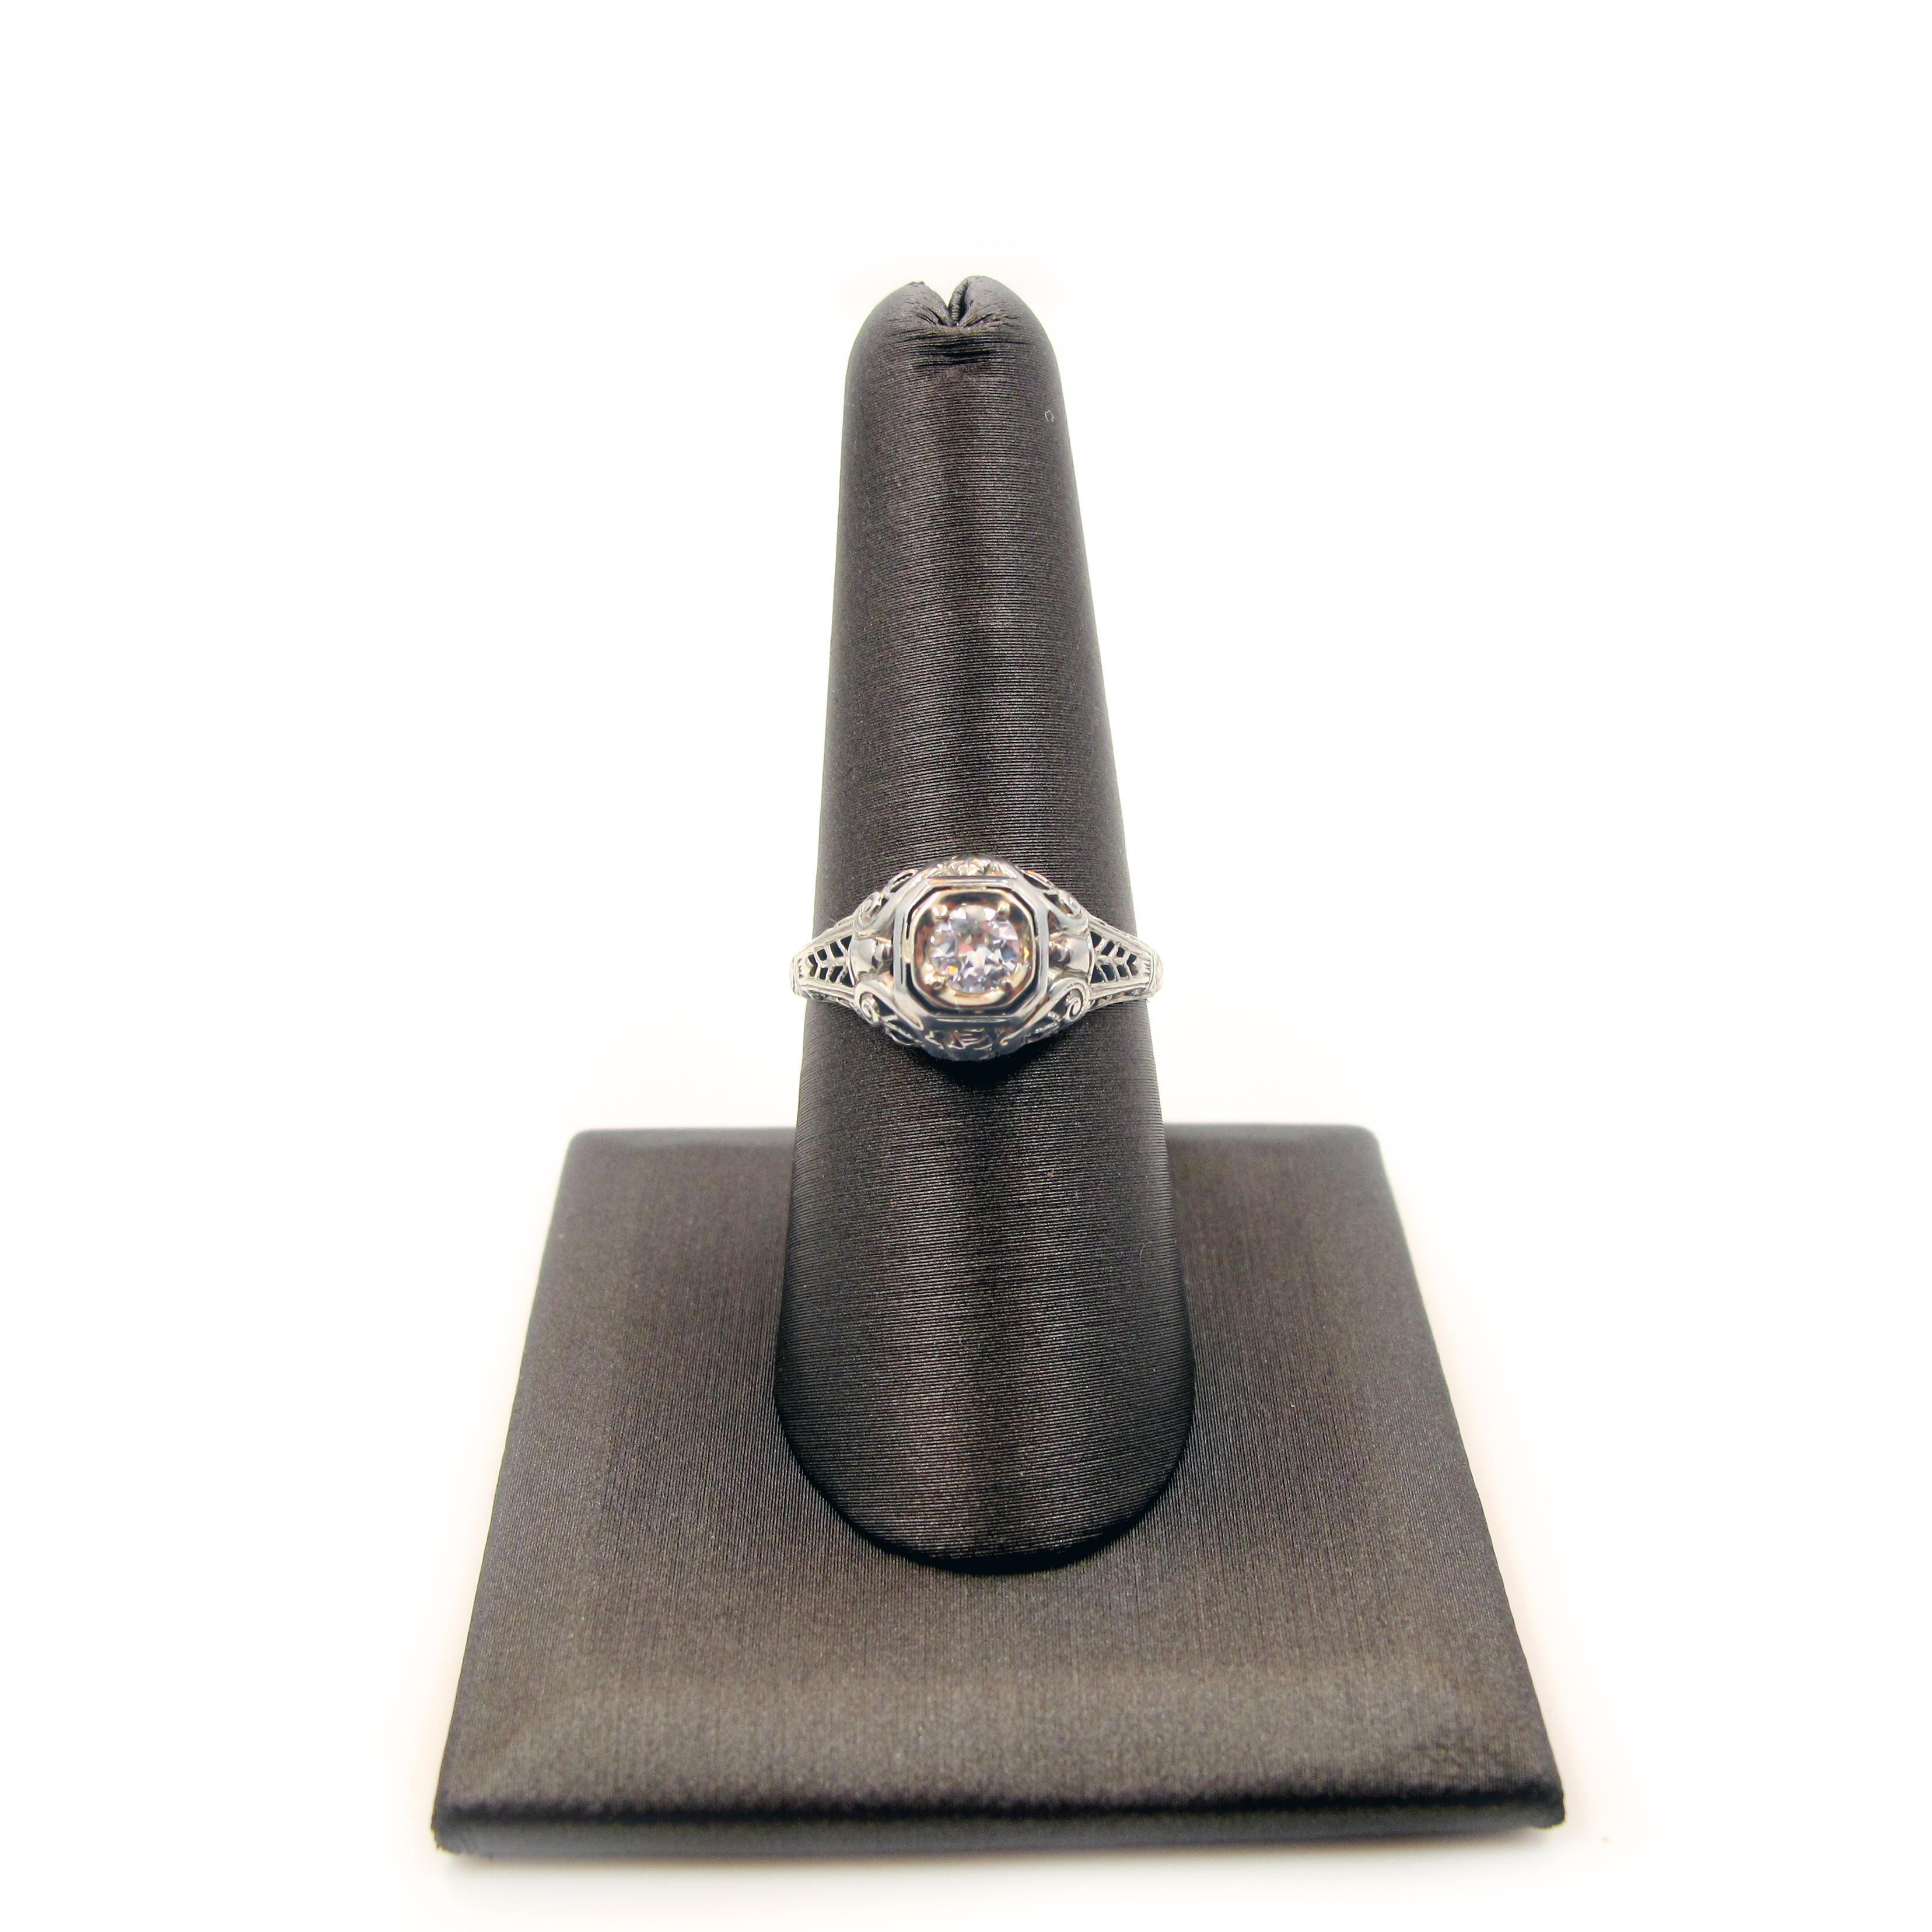 True Vintage 18k White Gold and Old Cut Diamond Ring In Fair Condition For Sale In Chicago, IL